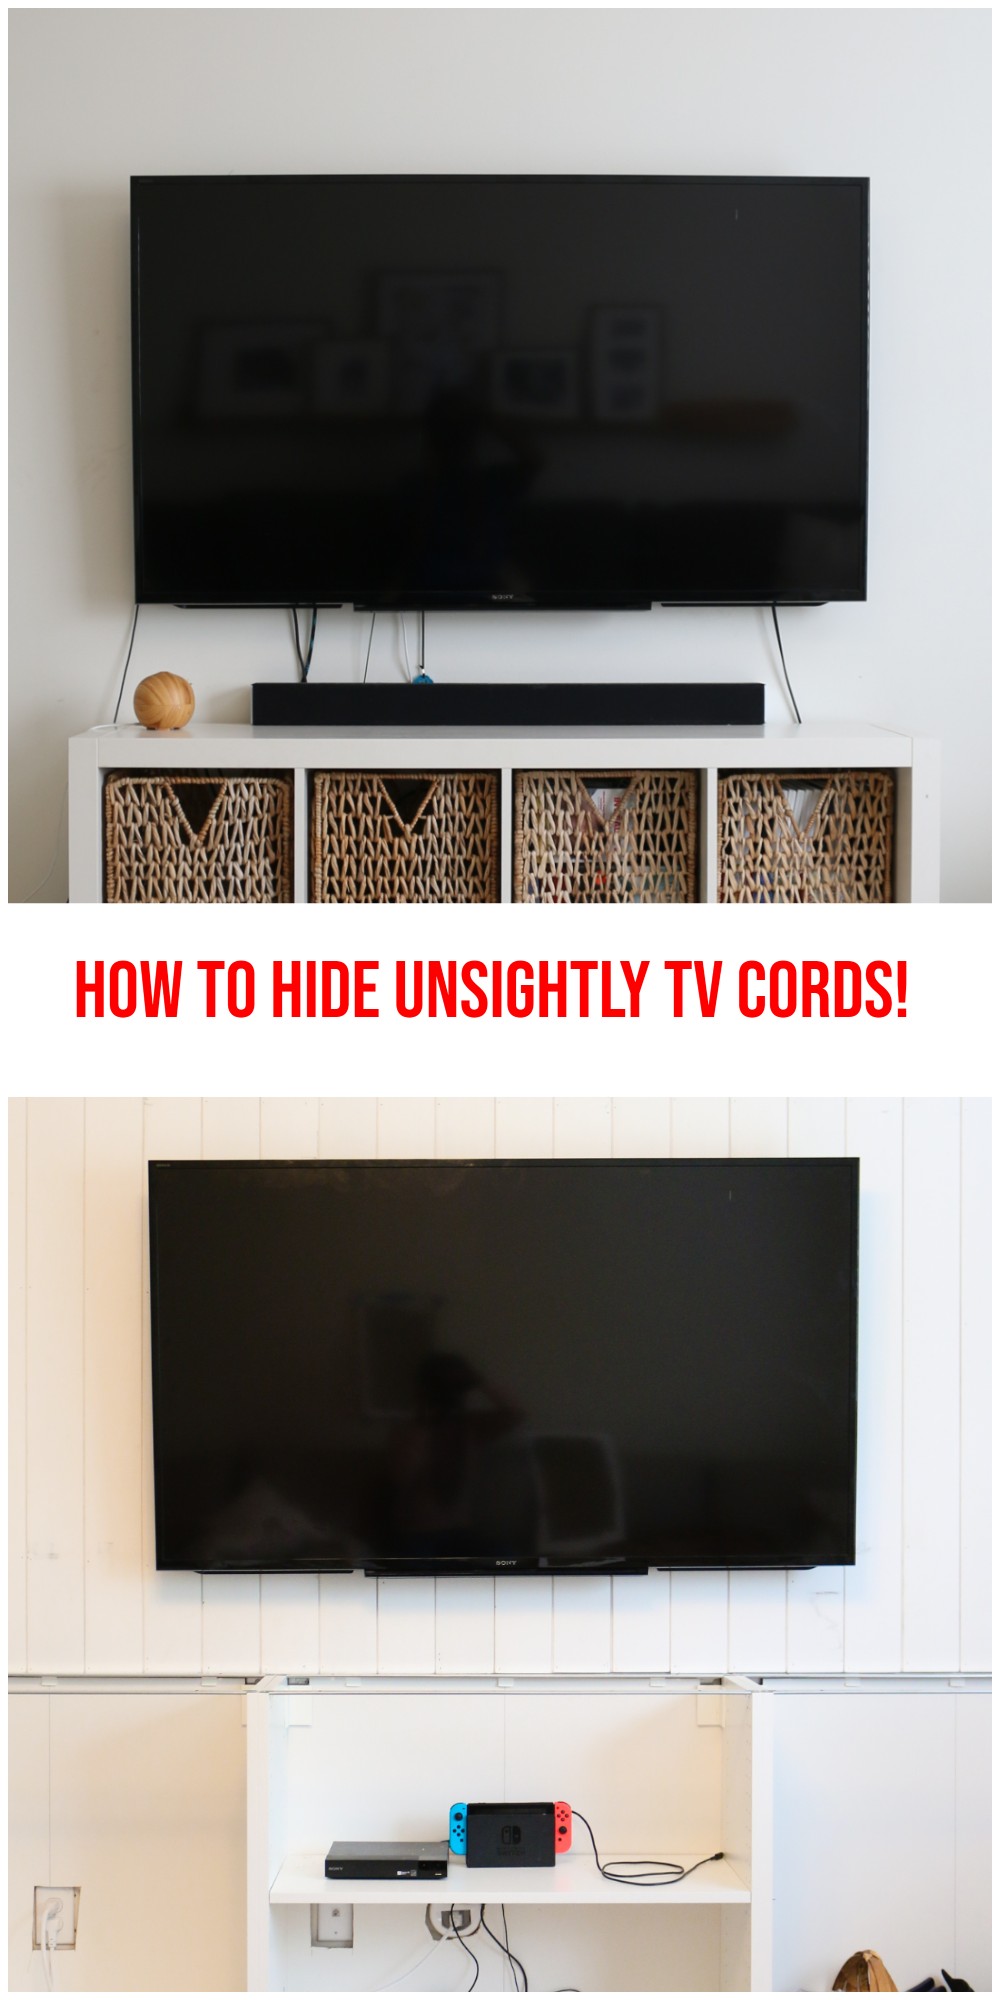 Don't hide your tech cables and cords. Display them artfully instead.  (Image credit: woohome)